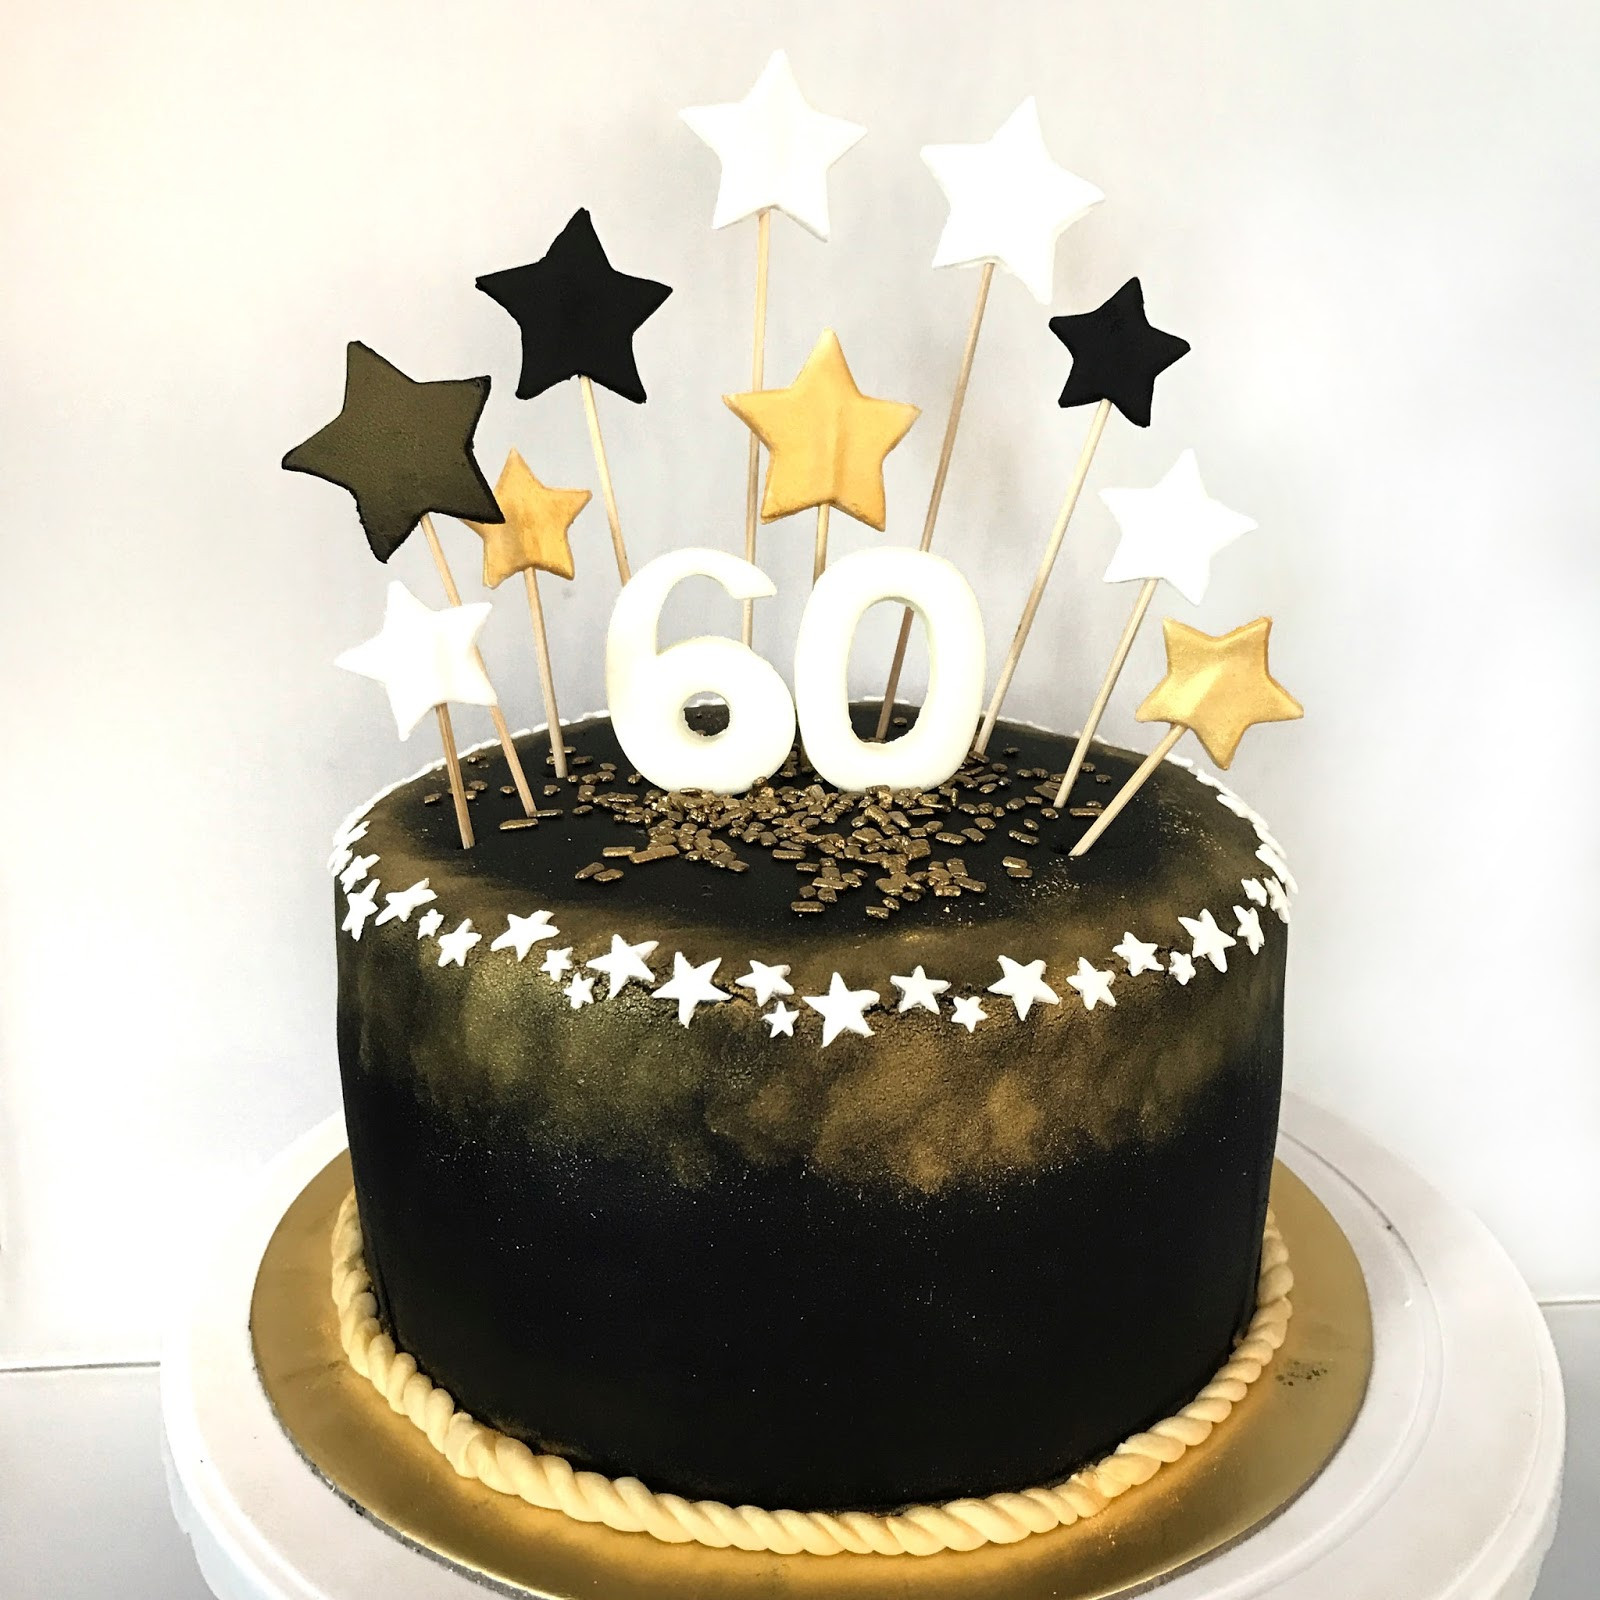 60th Birthday Cake Decorations
 Black and Gold 60th Birthday Cake Sherbakes